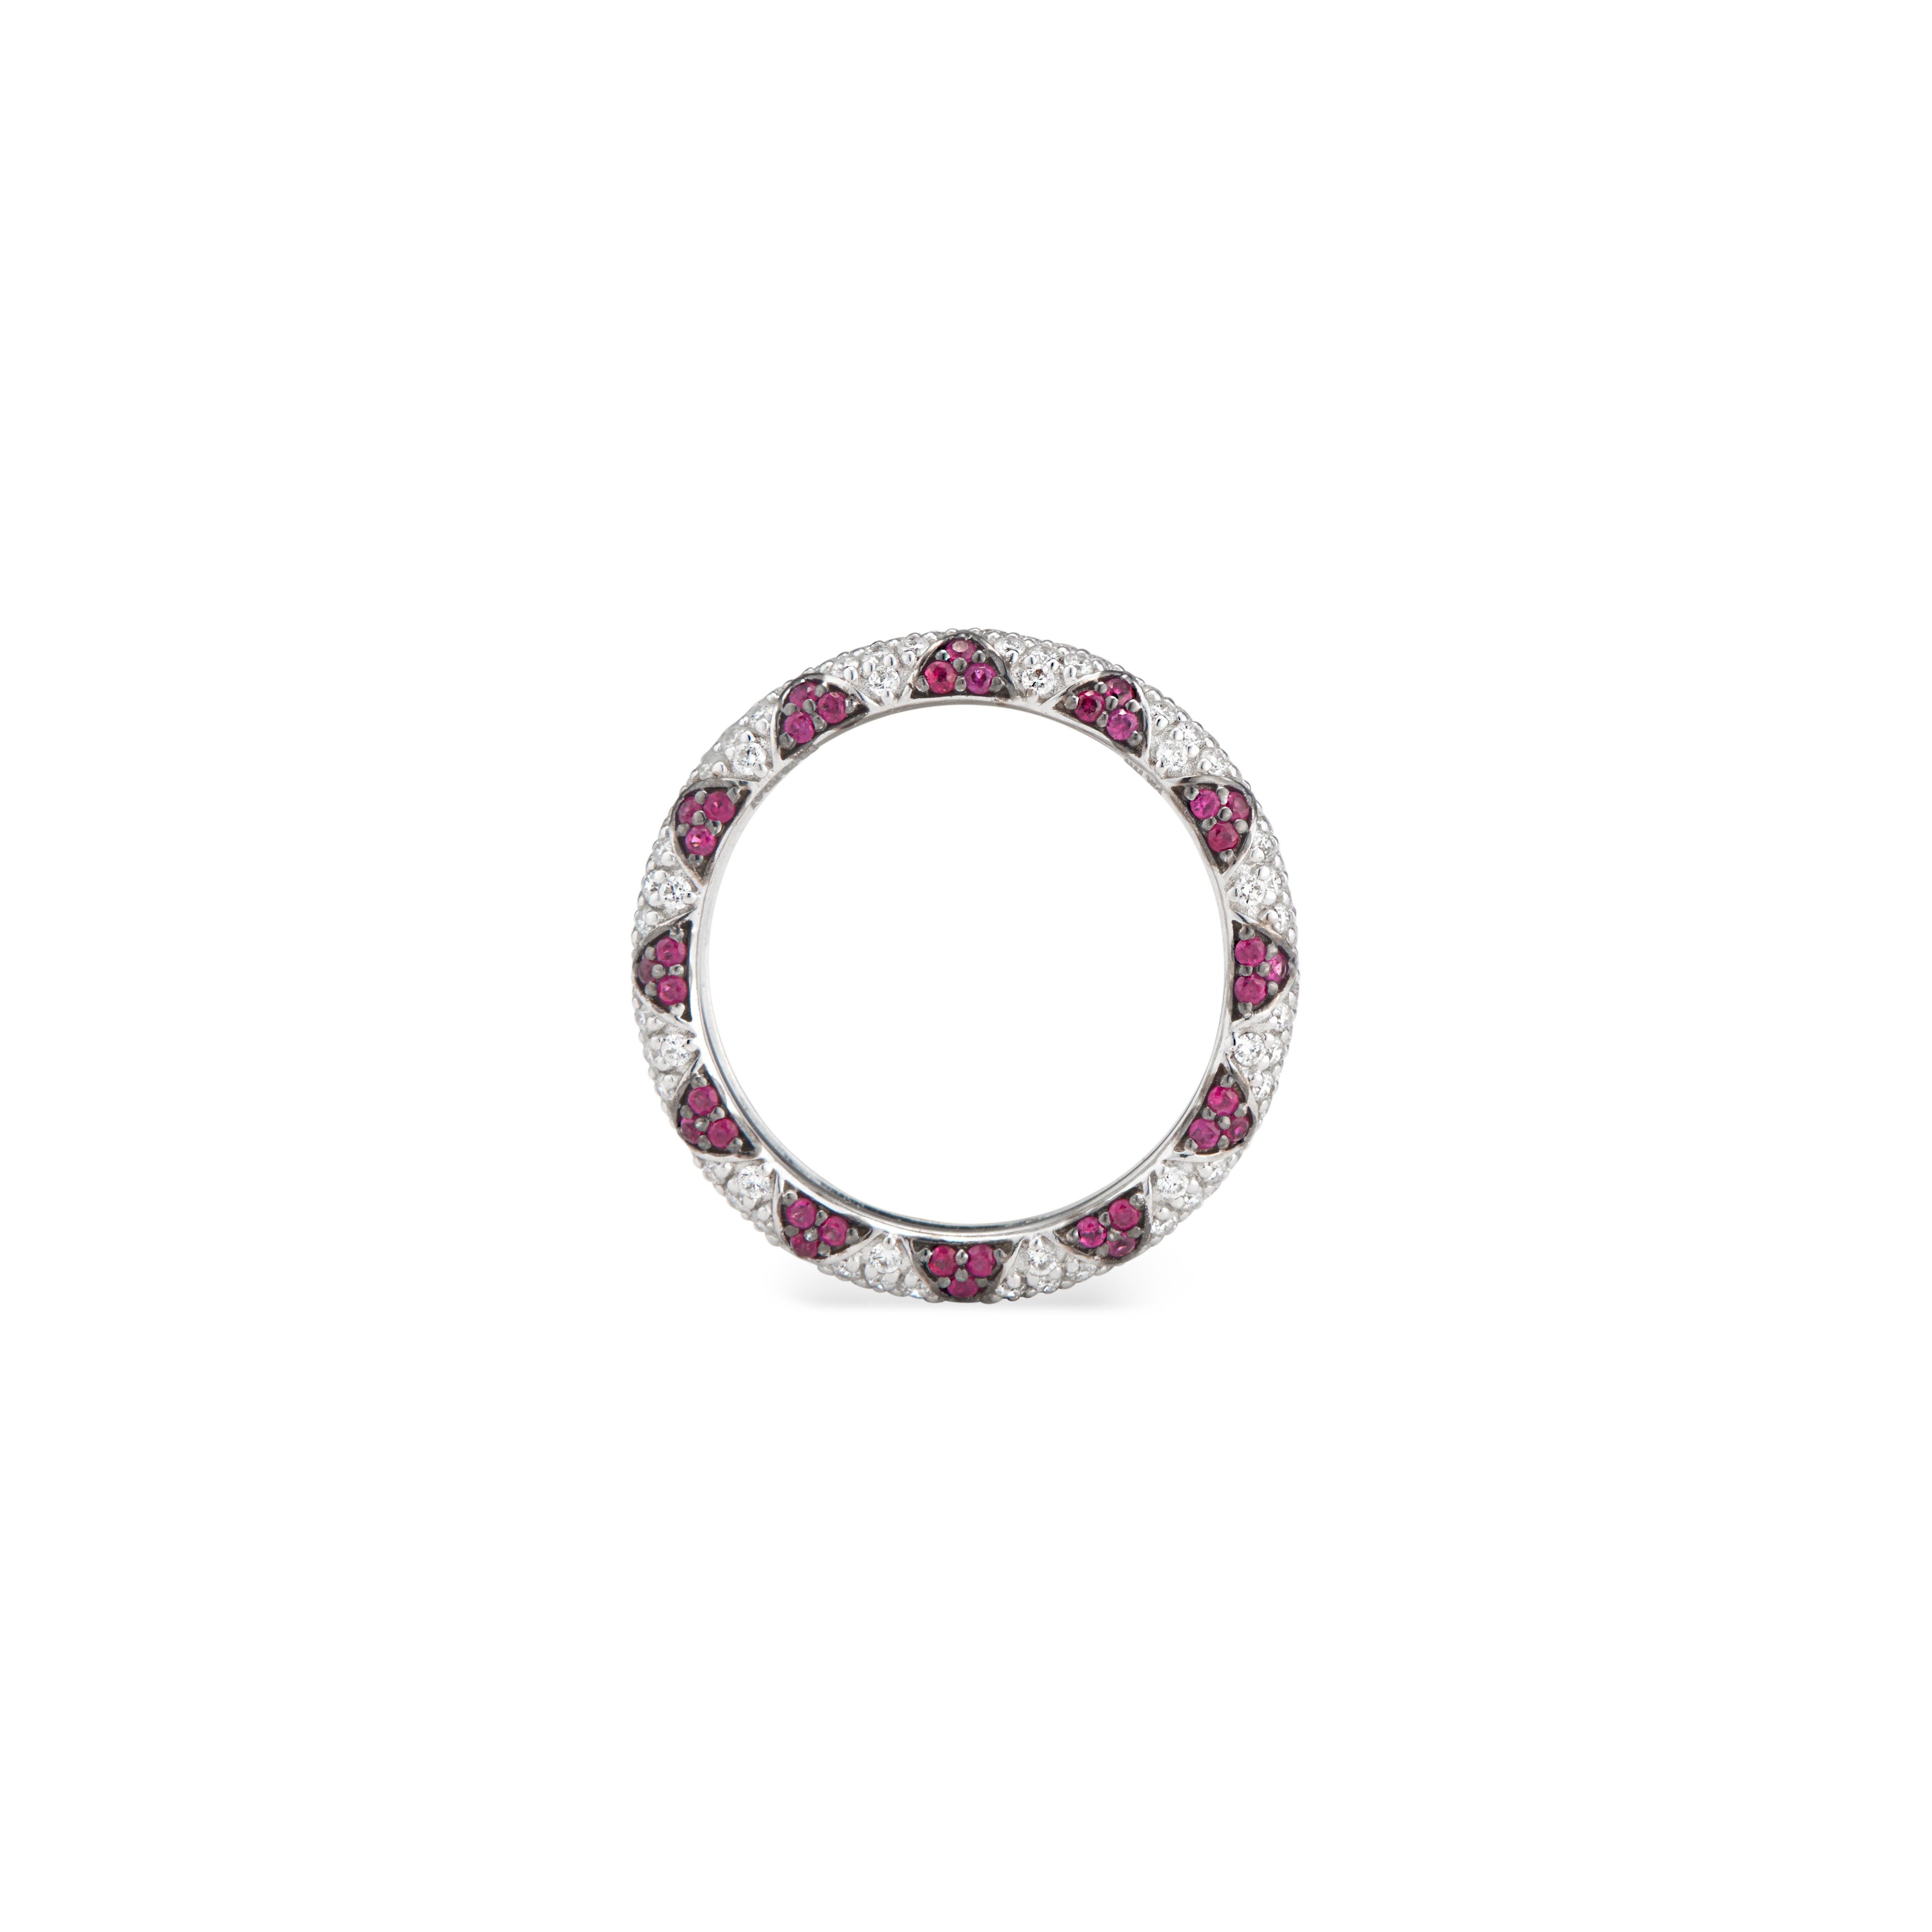 Lotus Eternity Band Ring with White Diamond Petals and Pave Set Rubies 3